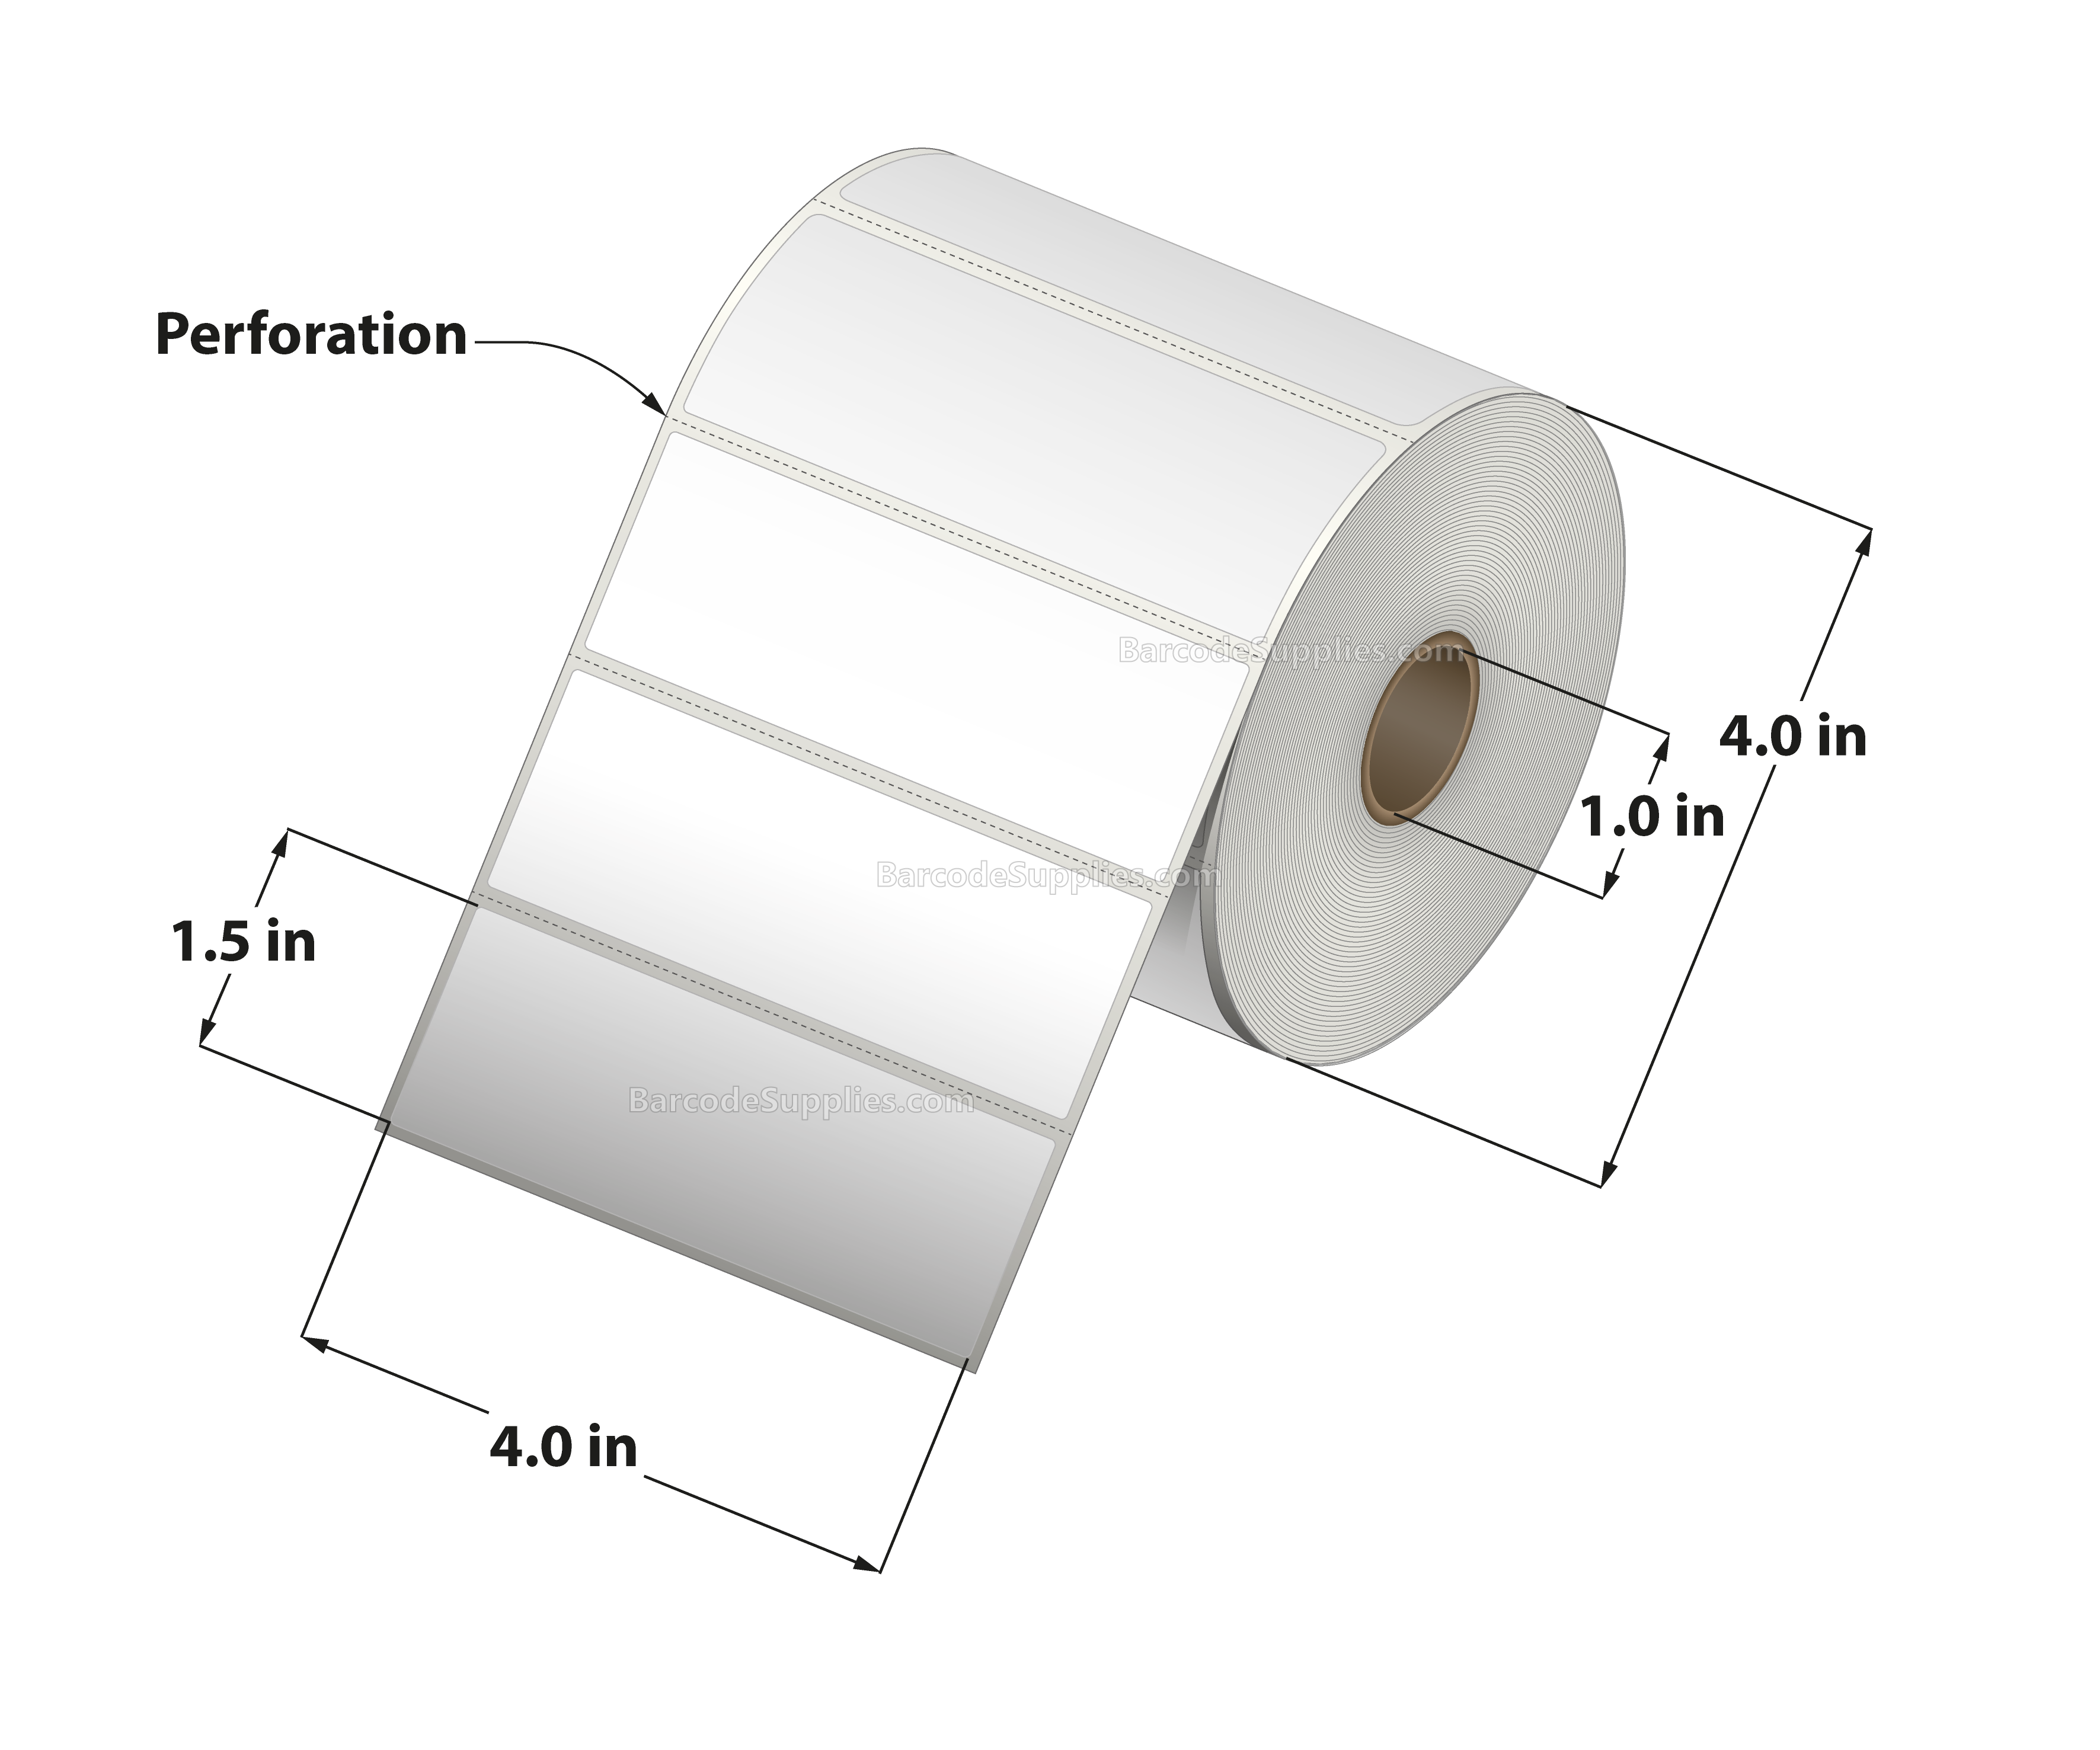 4 x 1.5 Thermal Transfer White Labels With Permanent Adhesive - Perforated - 960 Labels Per Roll - Carton Of 12 Rolls - 11520 Labels Total - MPN: RT-4-15-960-1 - BarcodeSource, Inc.